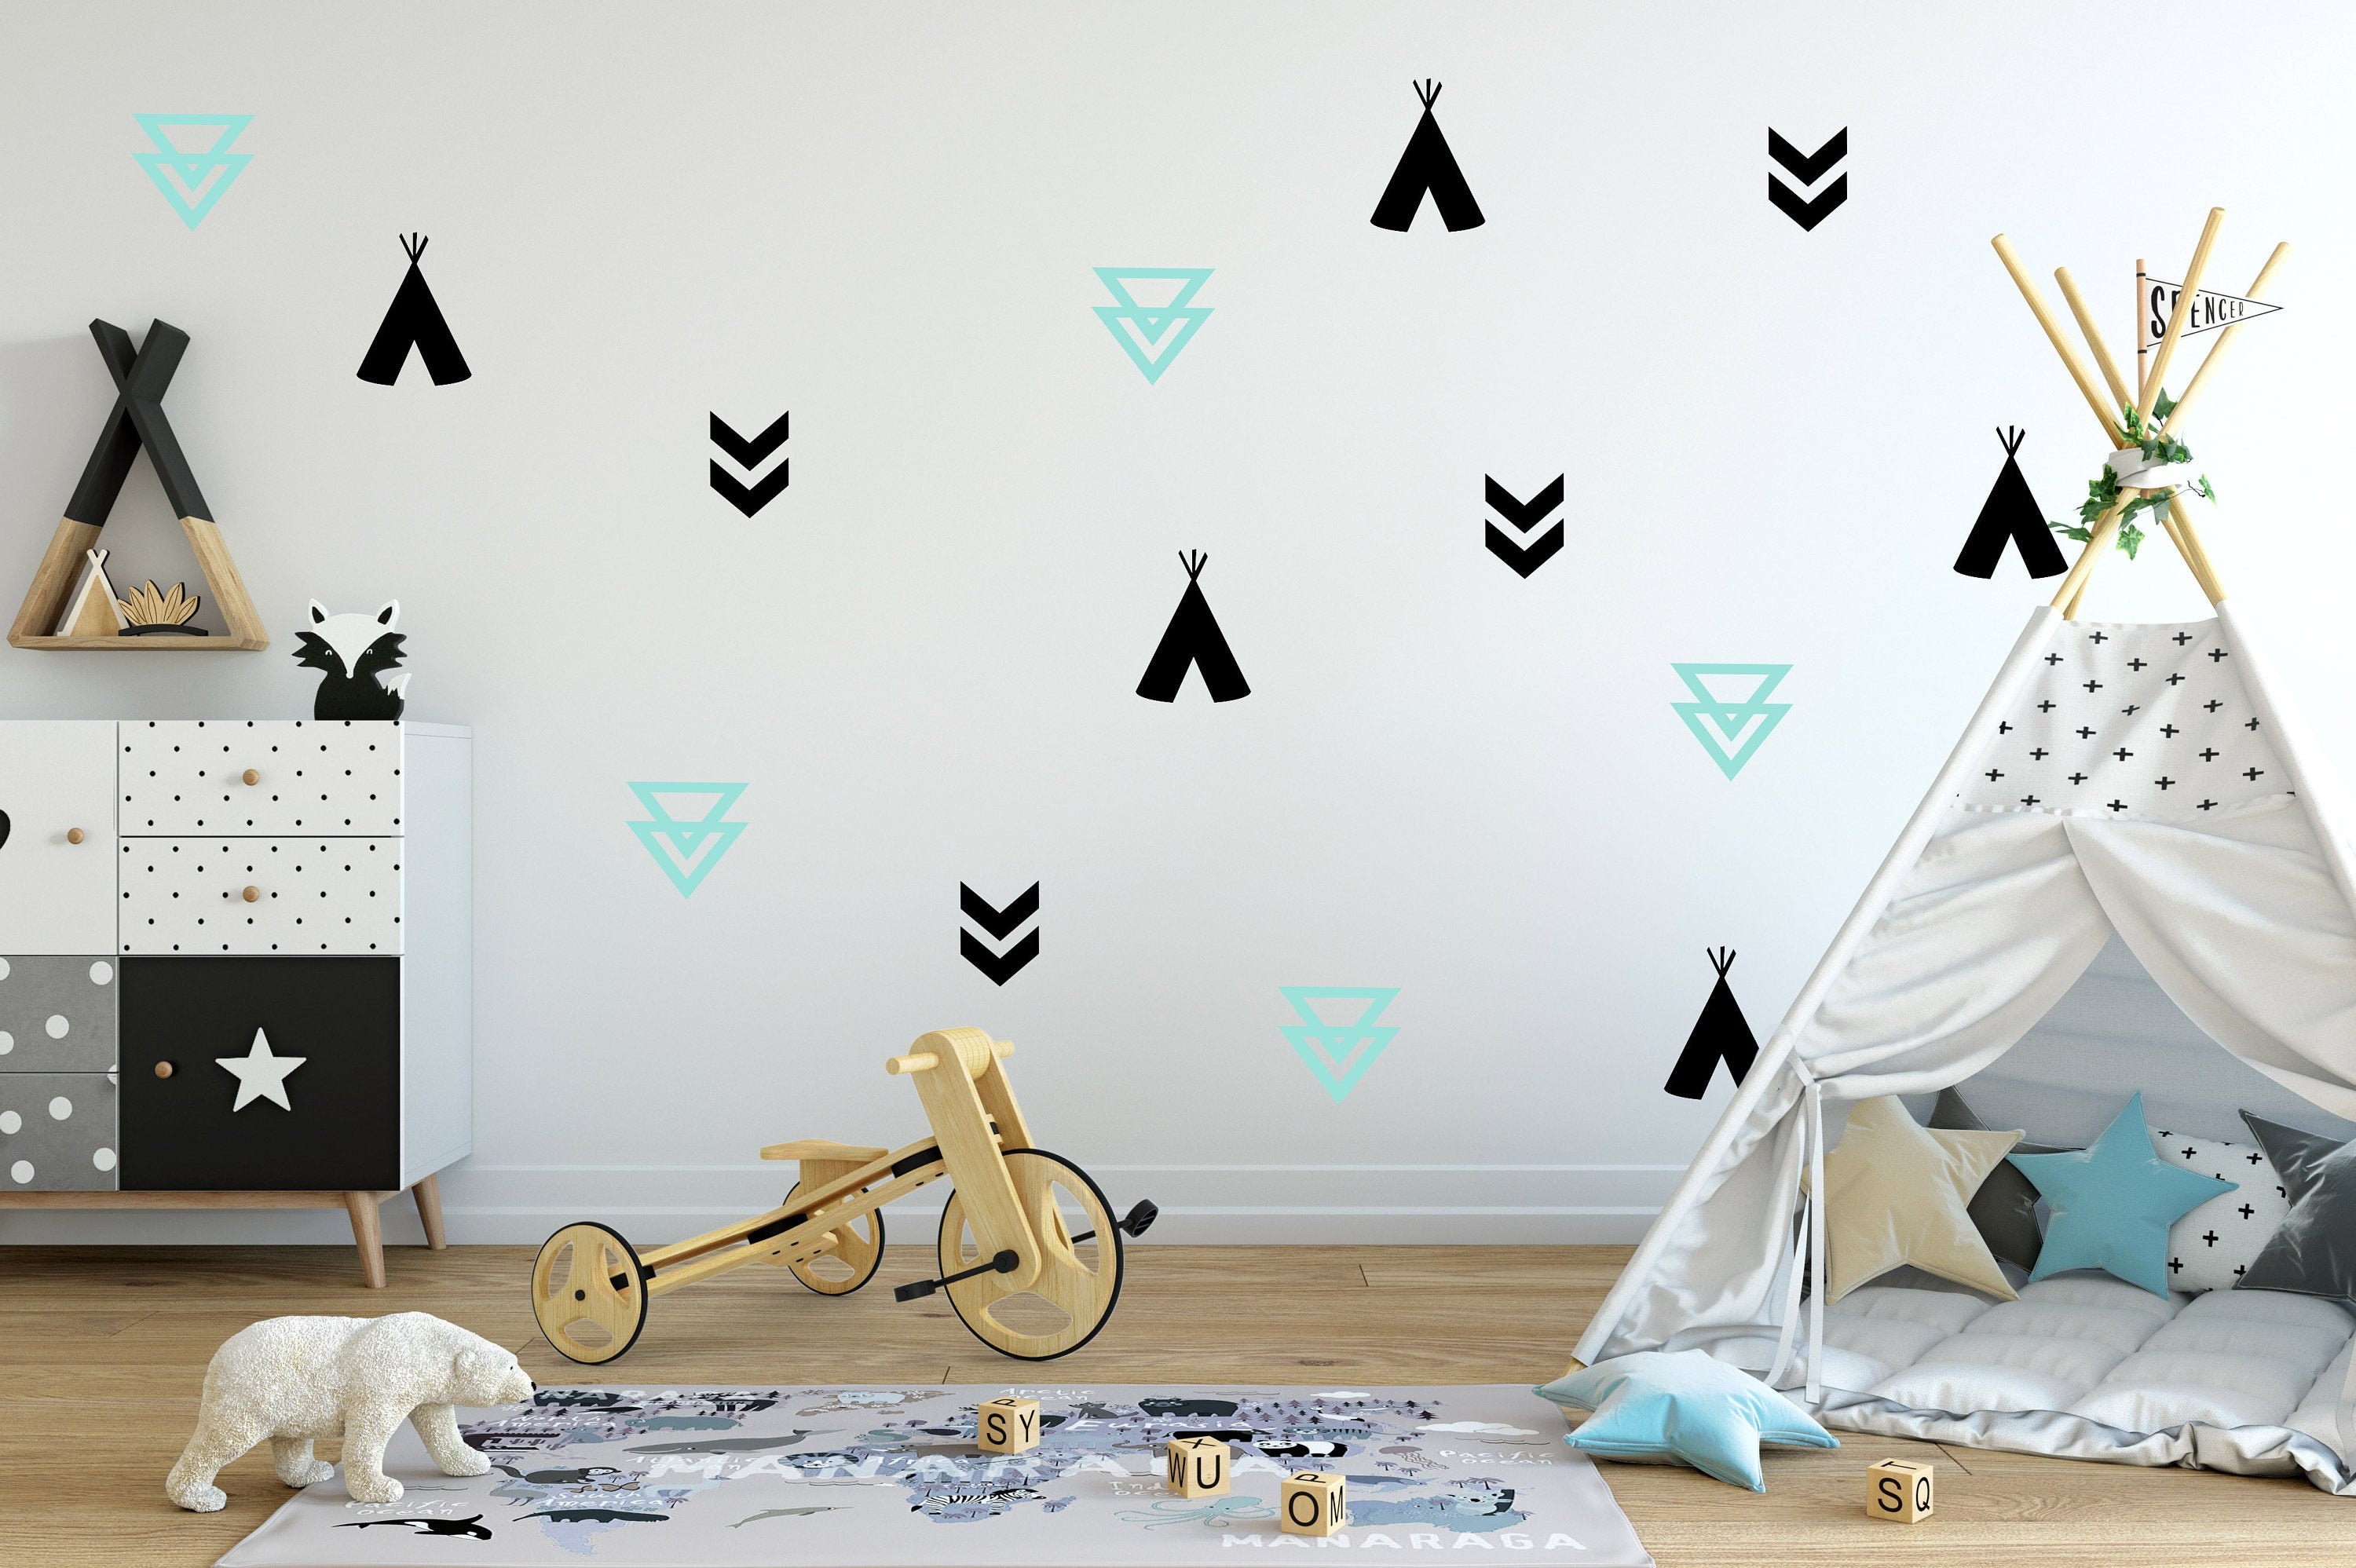 Tent Wall Sticker TeePee Wall Decal Indian Tepee Decal Kids wall decoration Nursery decal 